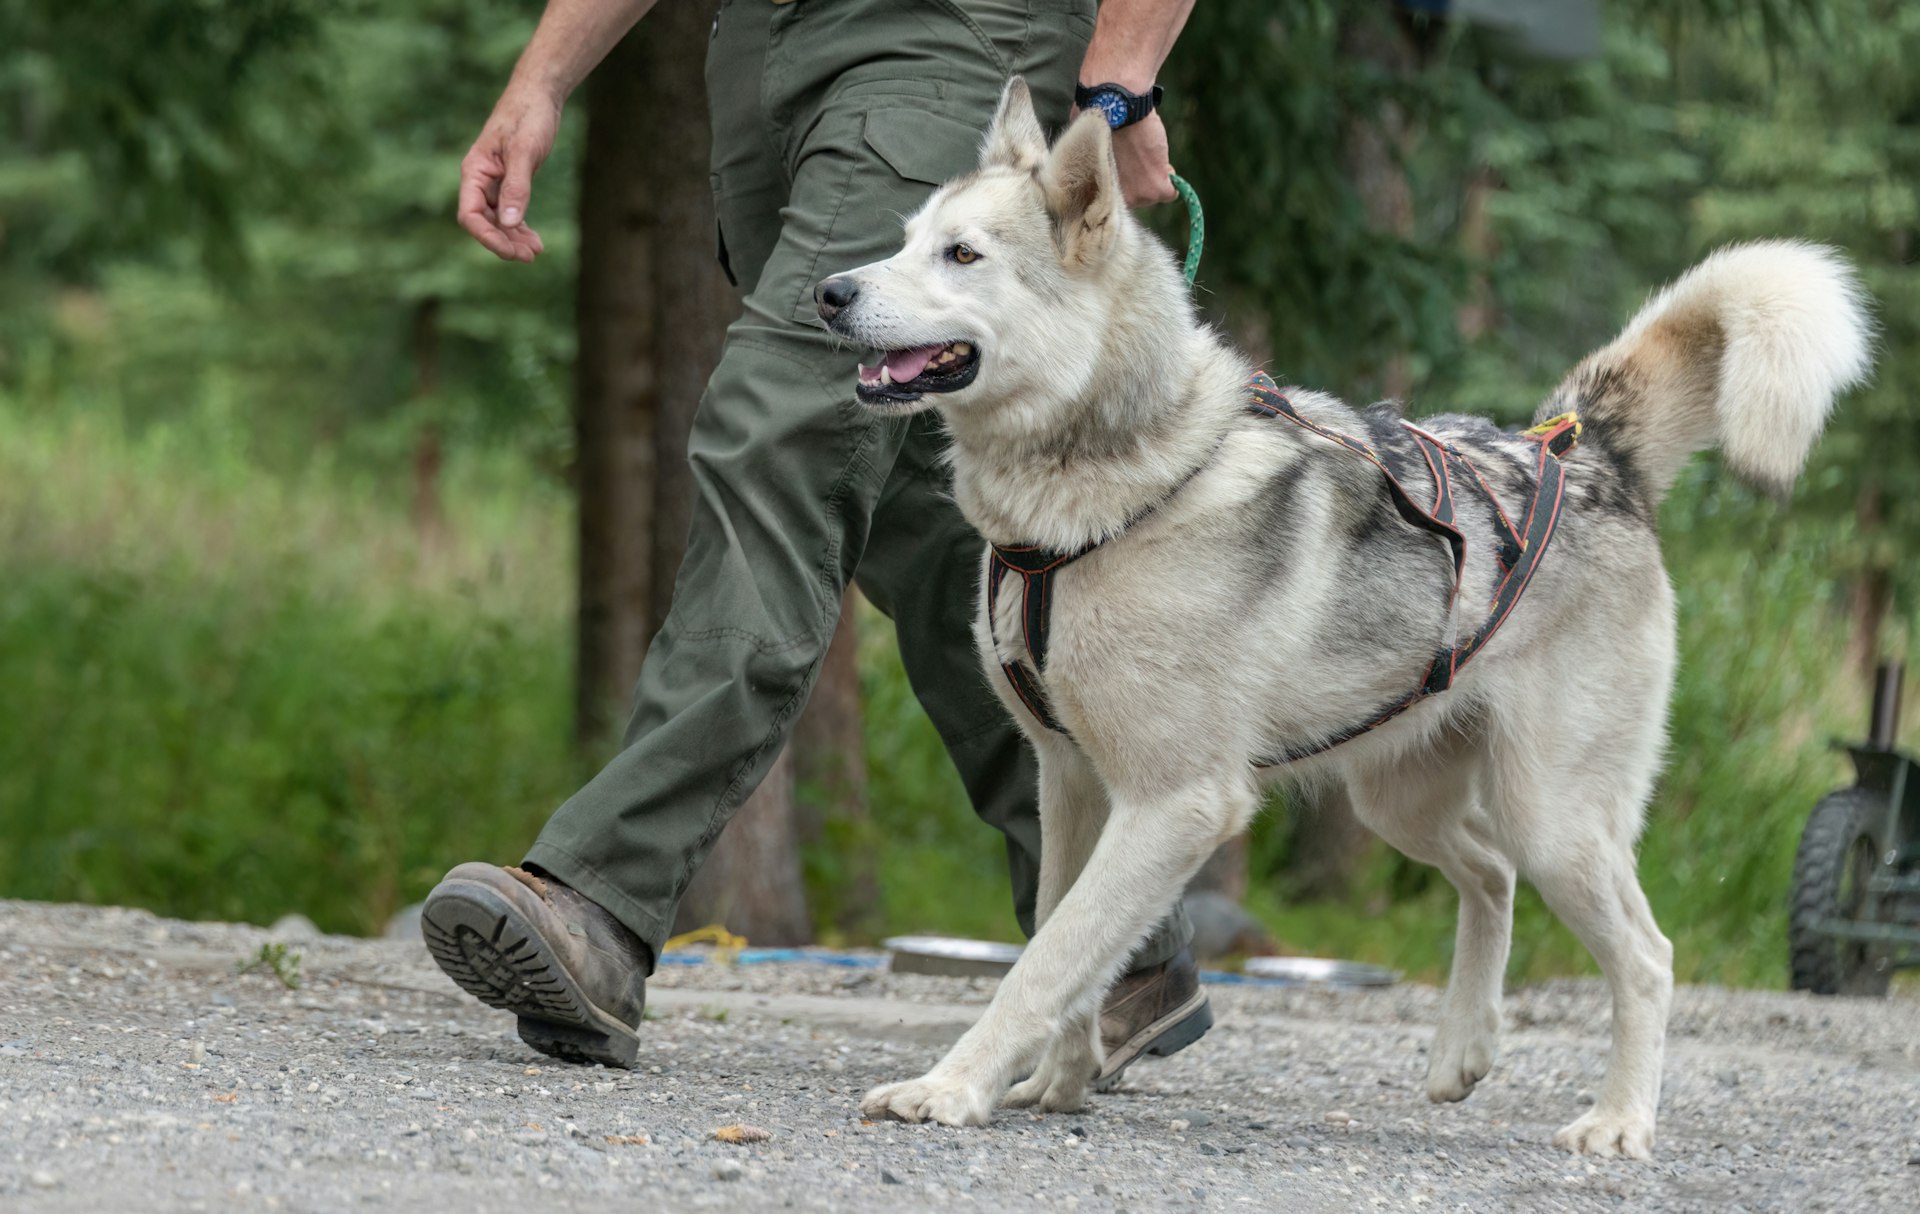 A husky dog in Denali National Park with a ranger holding its lead